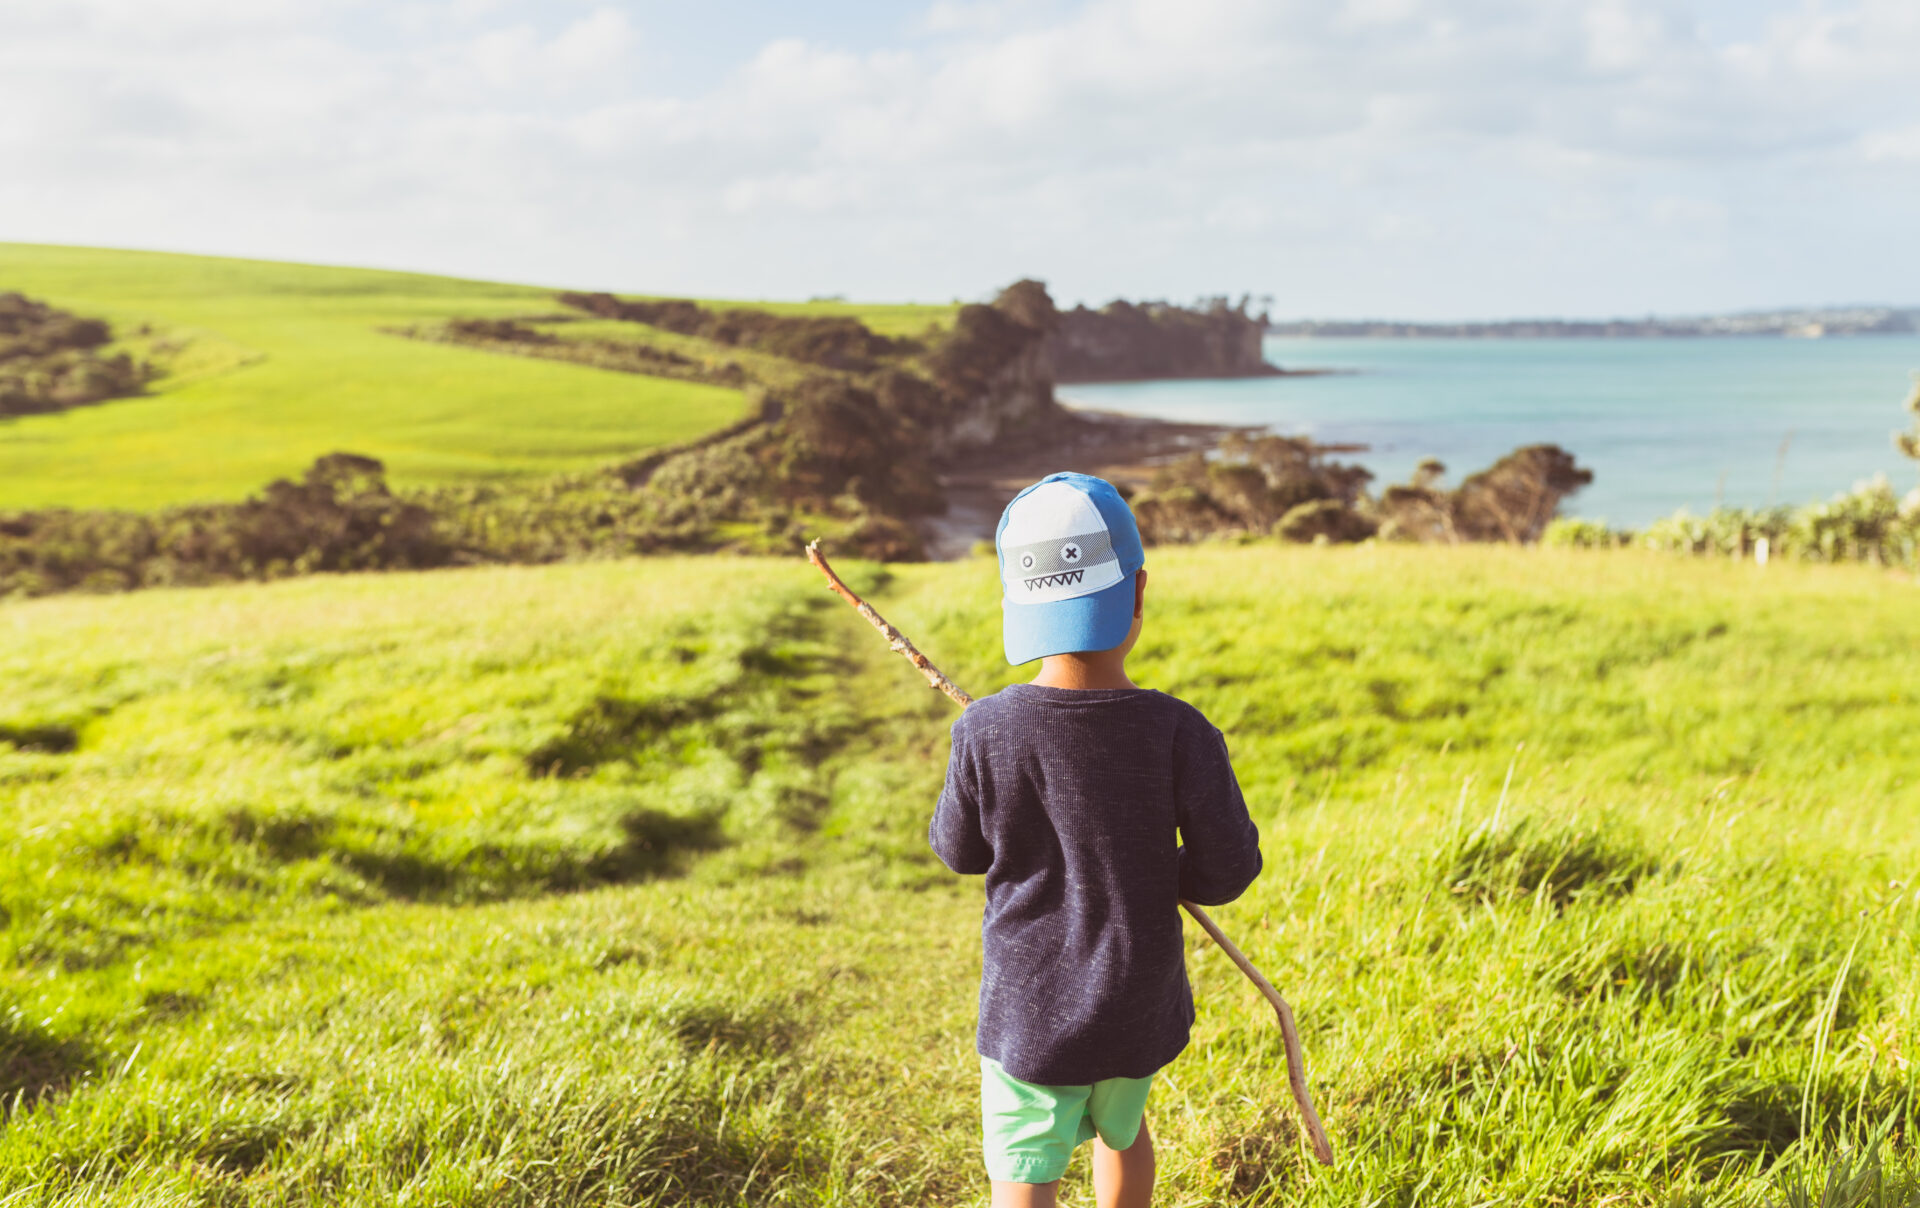 A child stands in a grassy field with the ocean in the distance